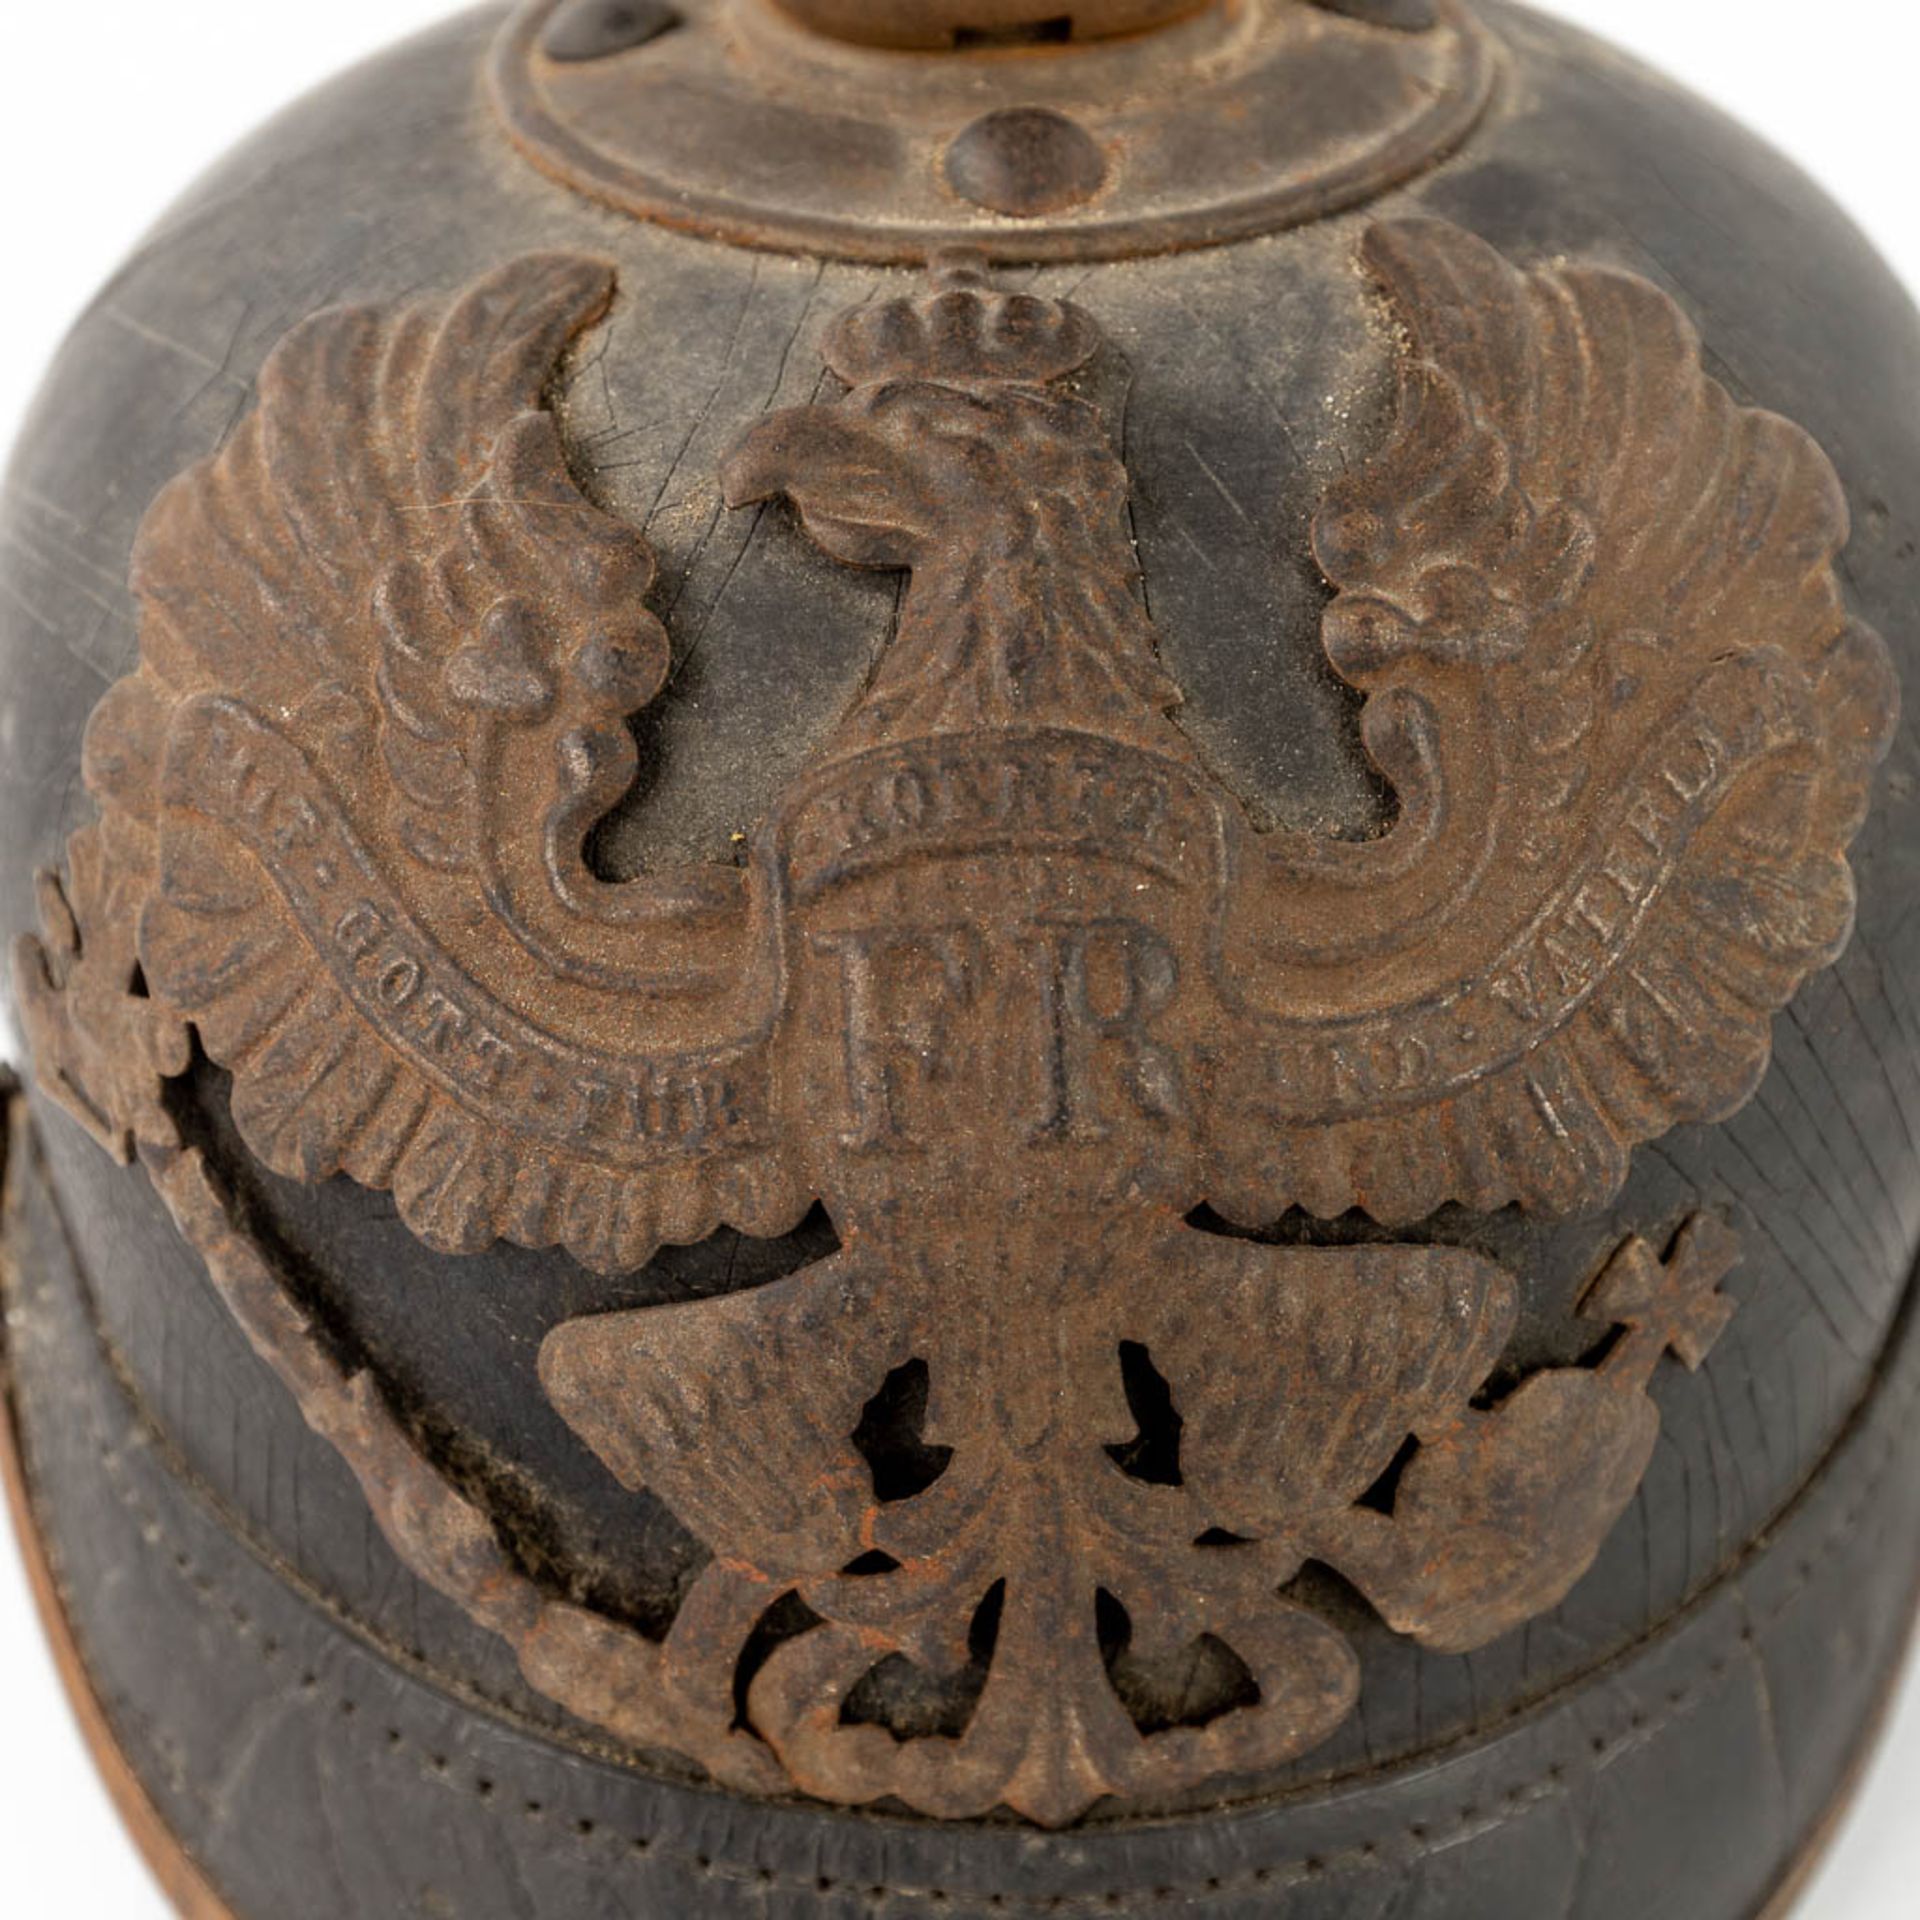 An antique German Pickelhaube. Leather and copper. (L: 18 x W: 23 x H: 20 cm) - Image 11 of 15